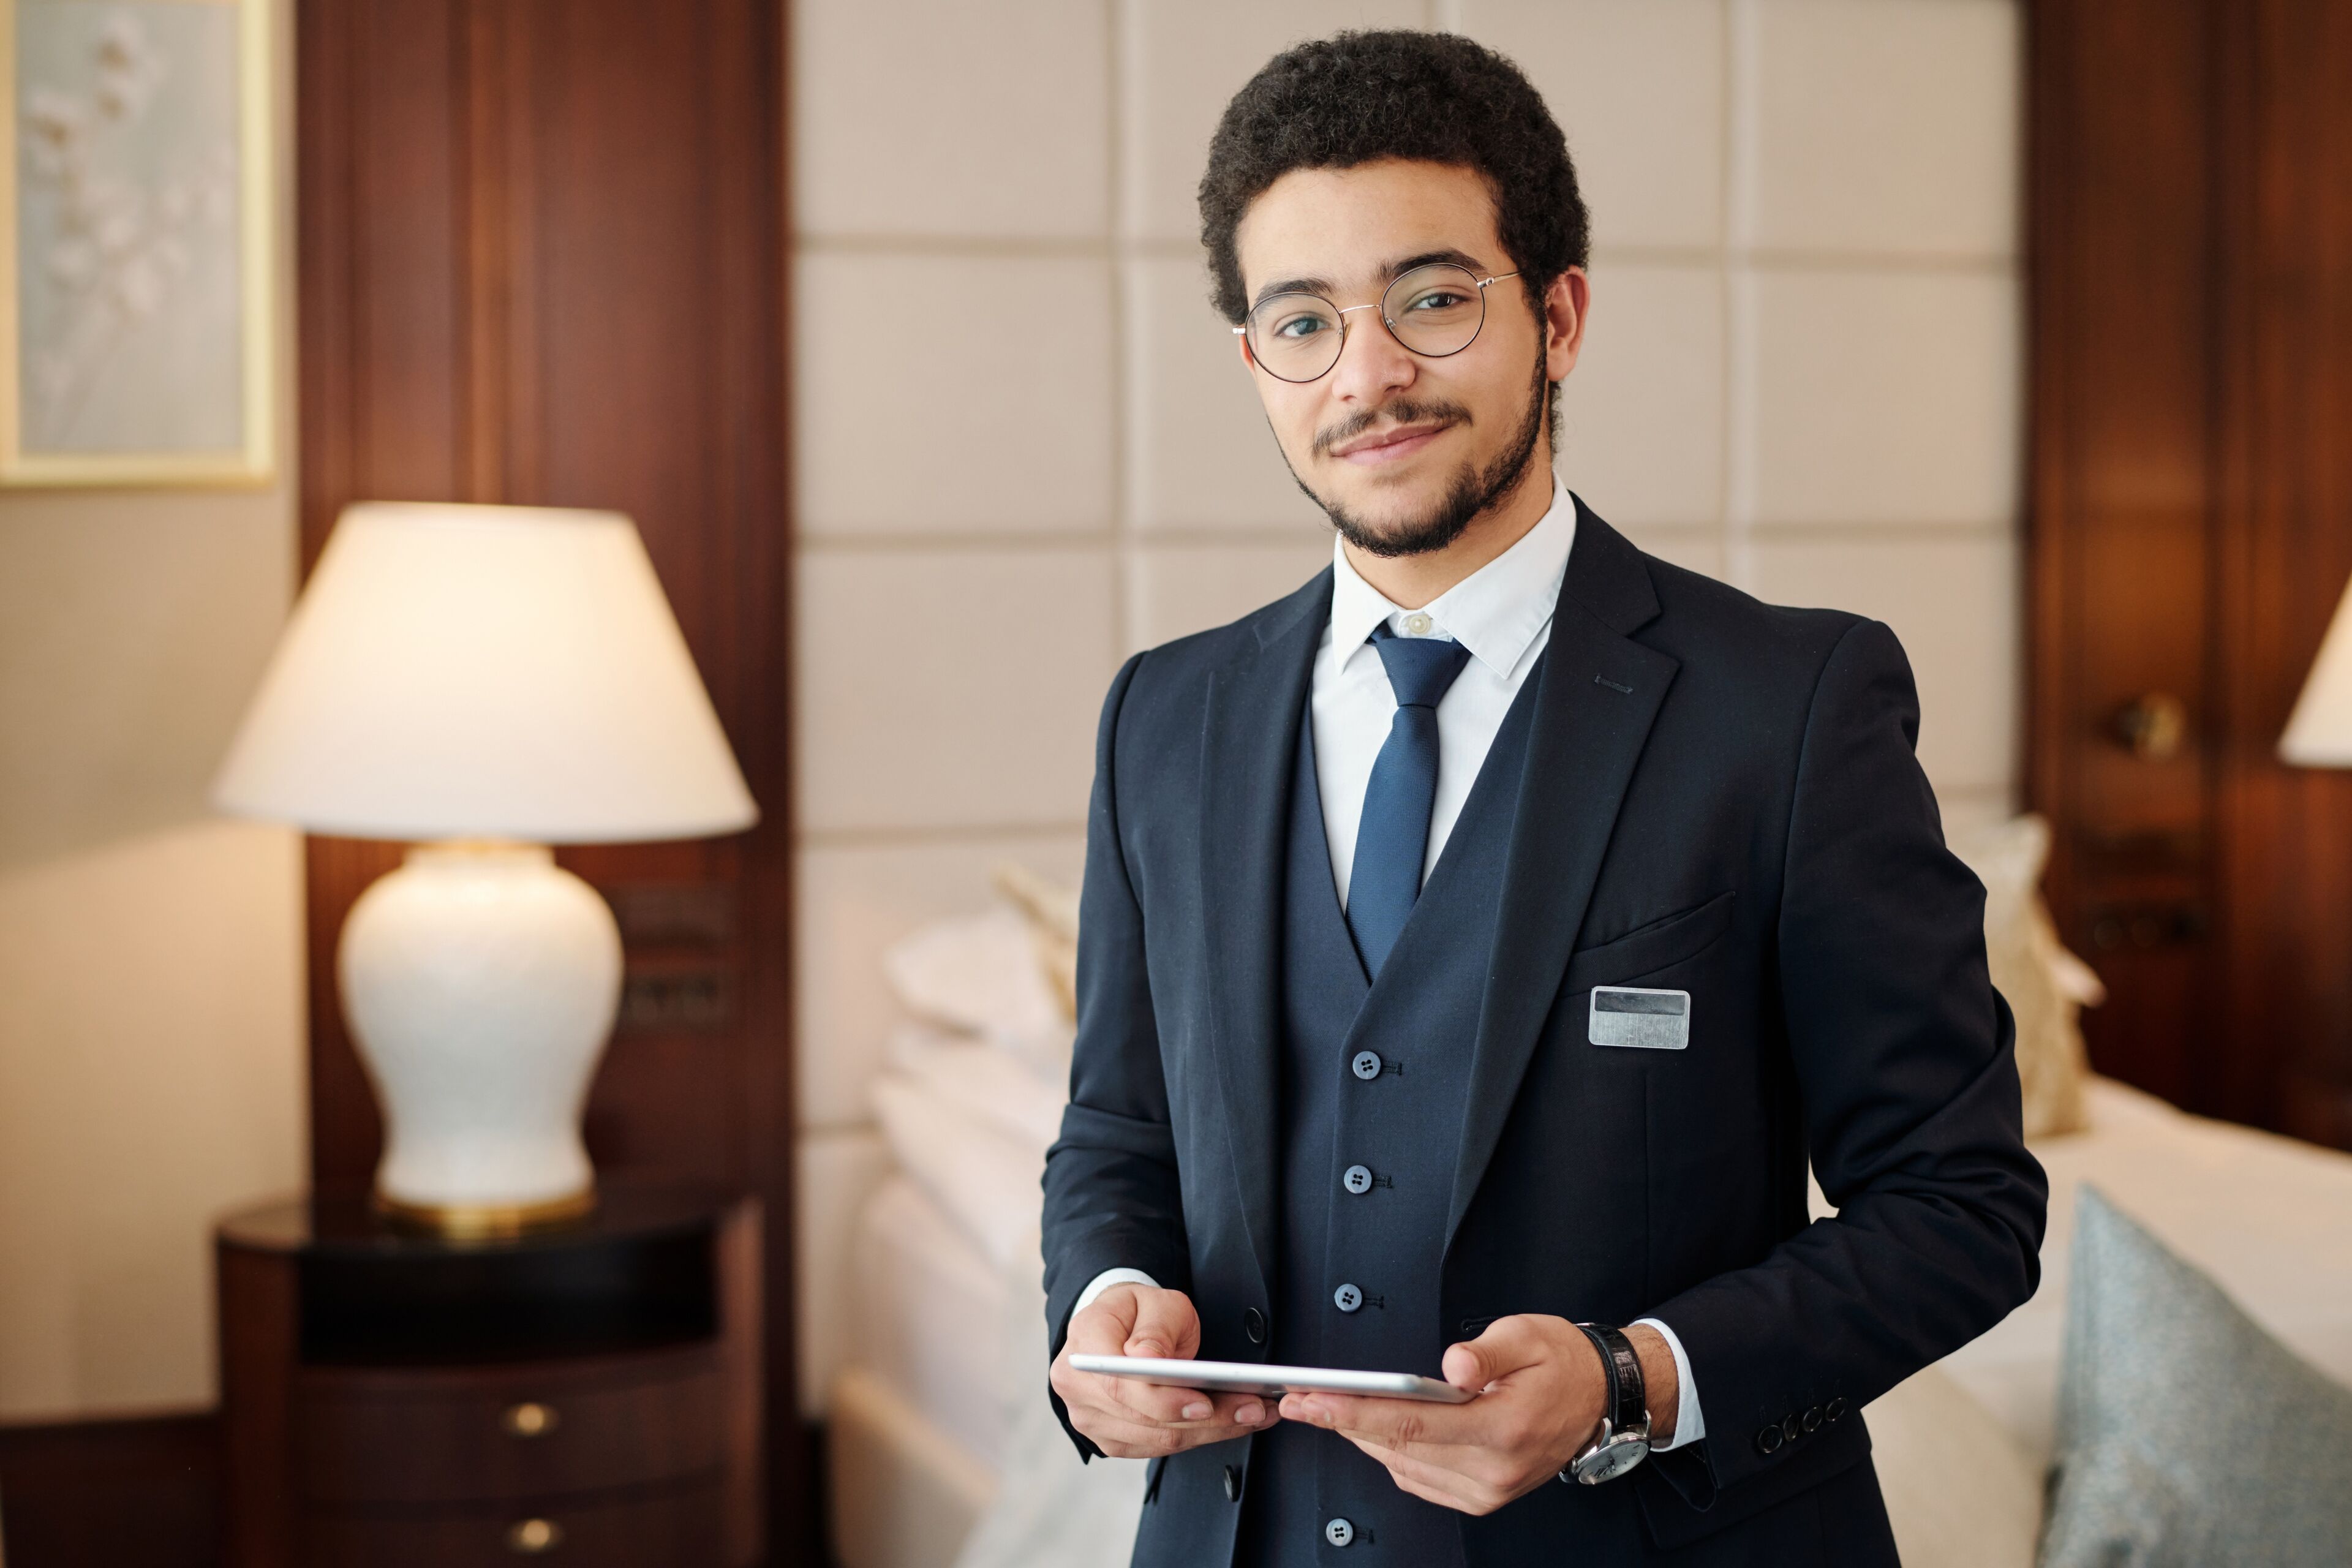 ImageA professional male concierge in a tailored suit stands with a welcoming smile, holding a digital tablet in a luxurious hotel room.